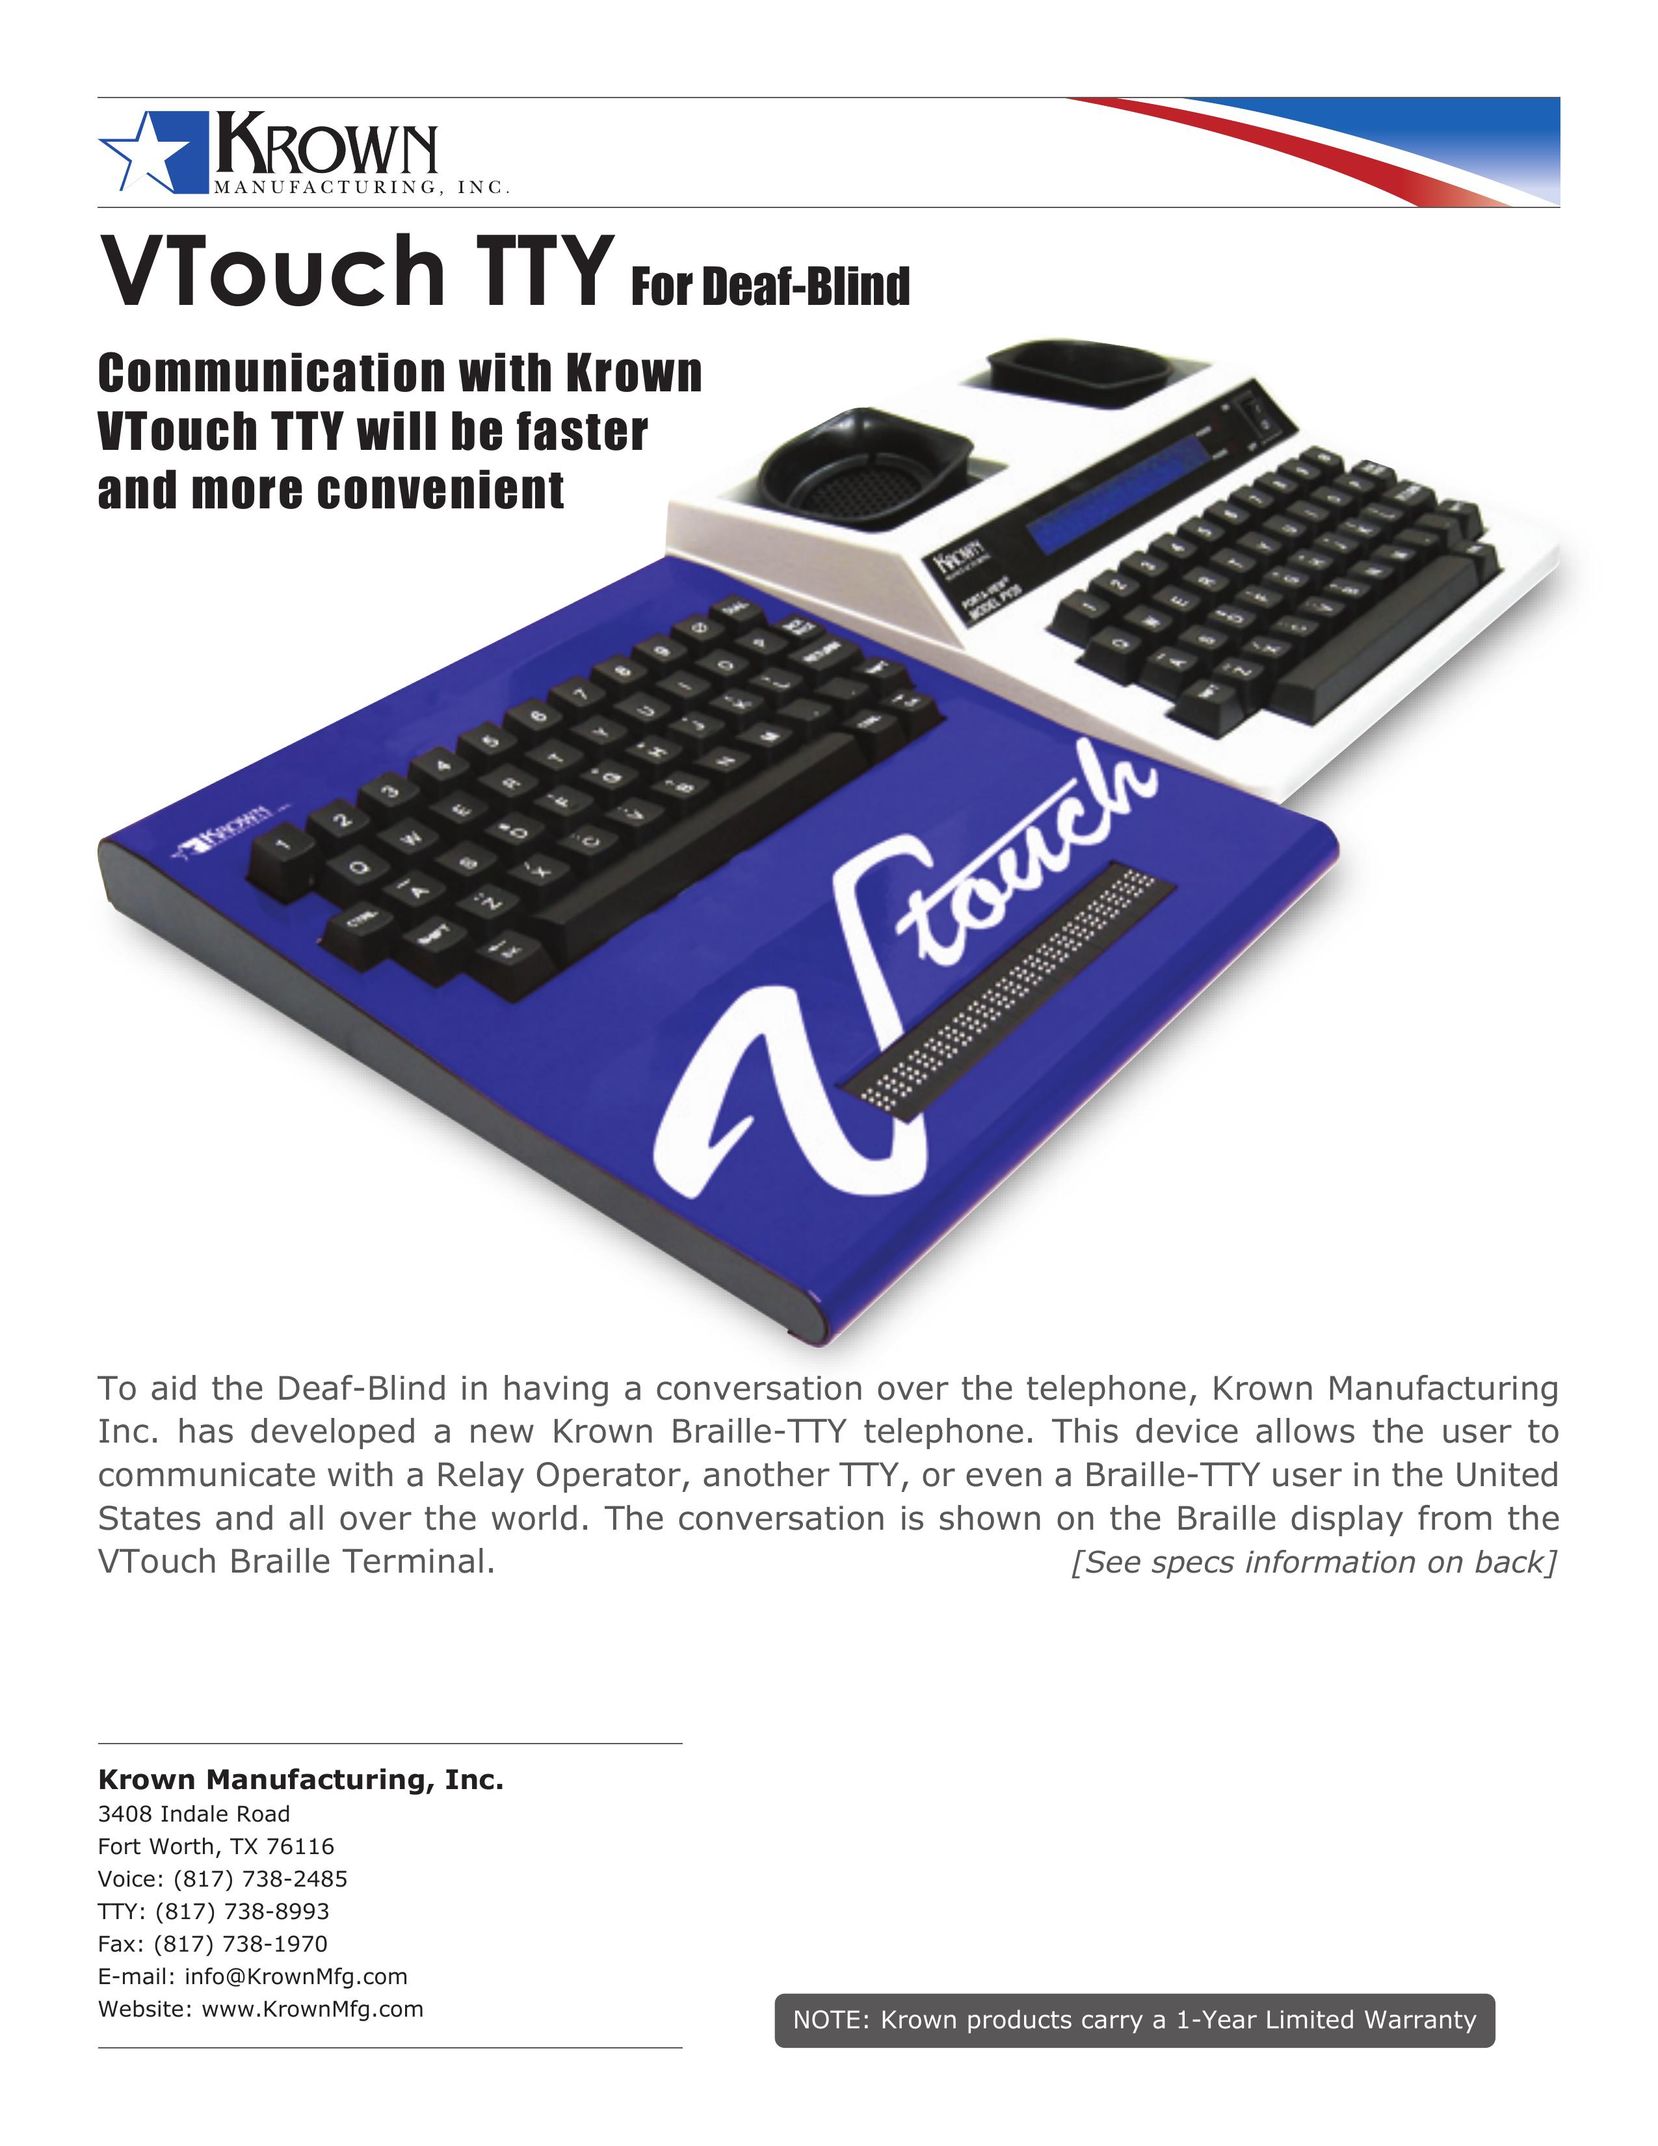 Krown Manufacturing VTouch TTY Personal Computer User Manual